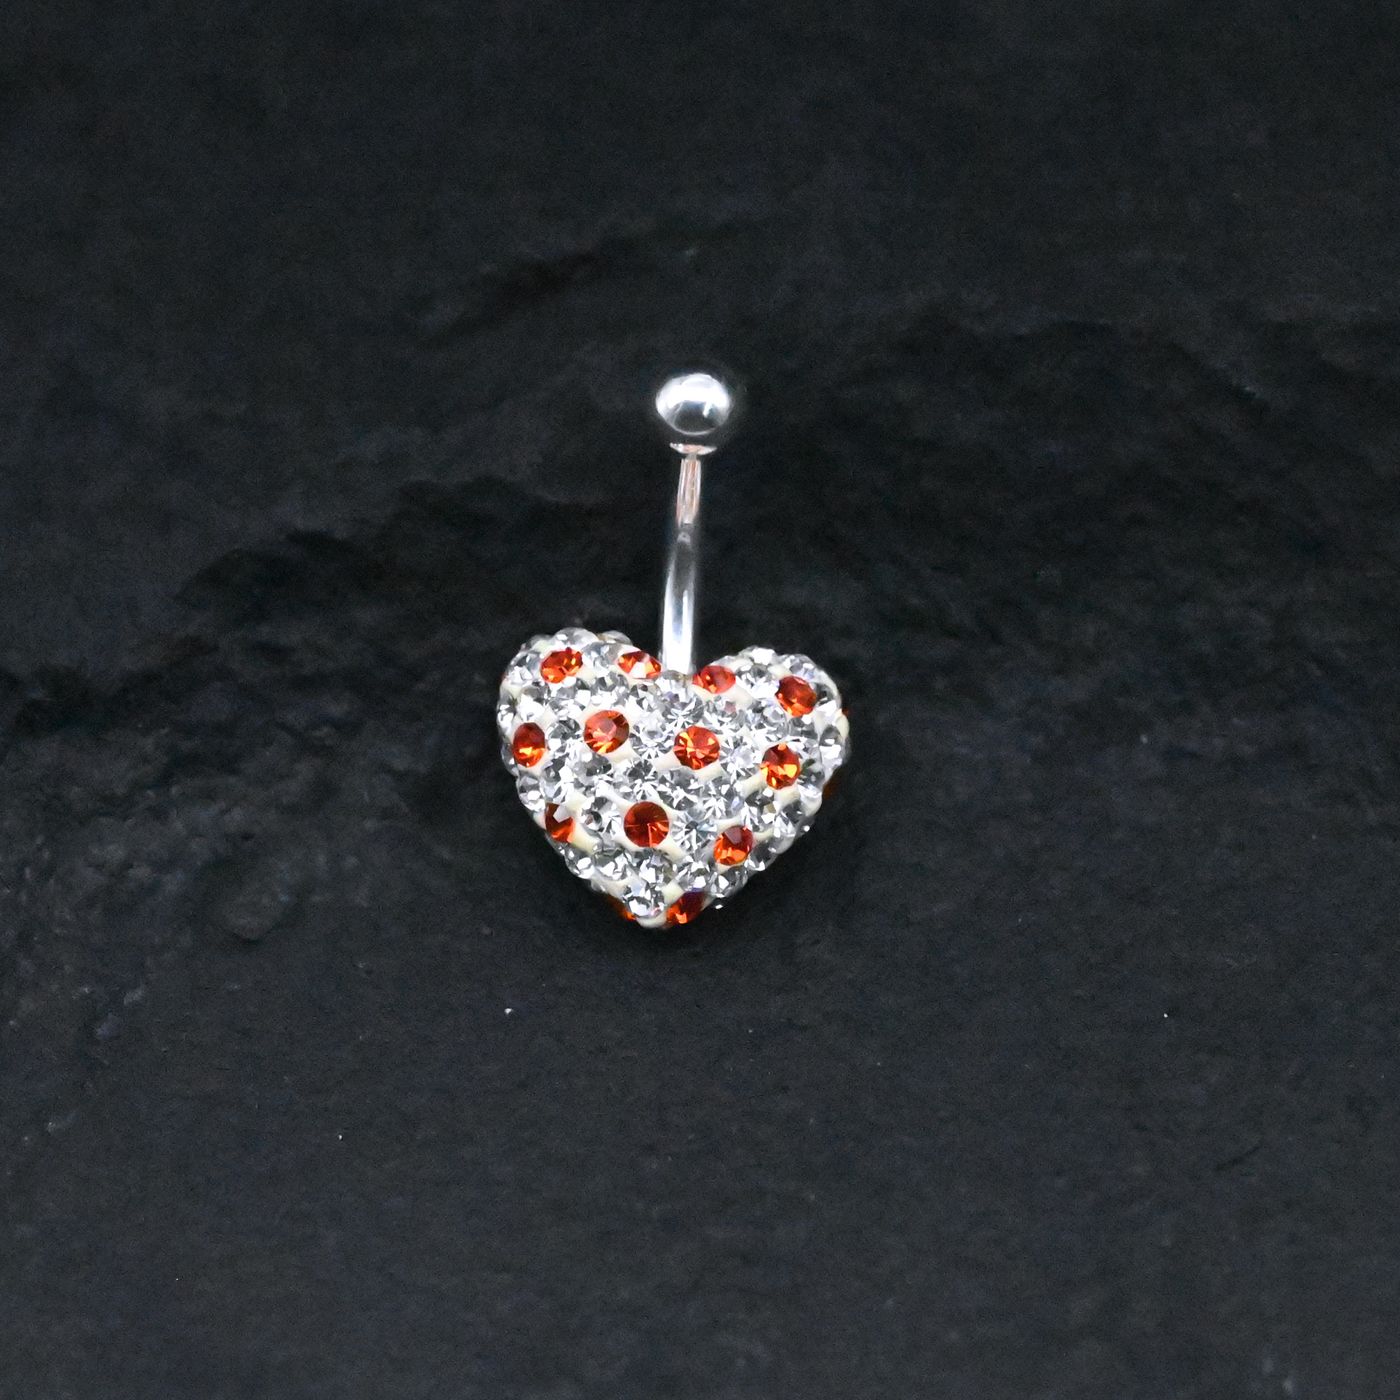 Clear Crystal Heart Shaped Navel Ring